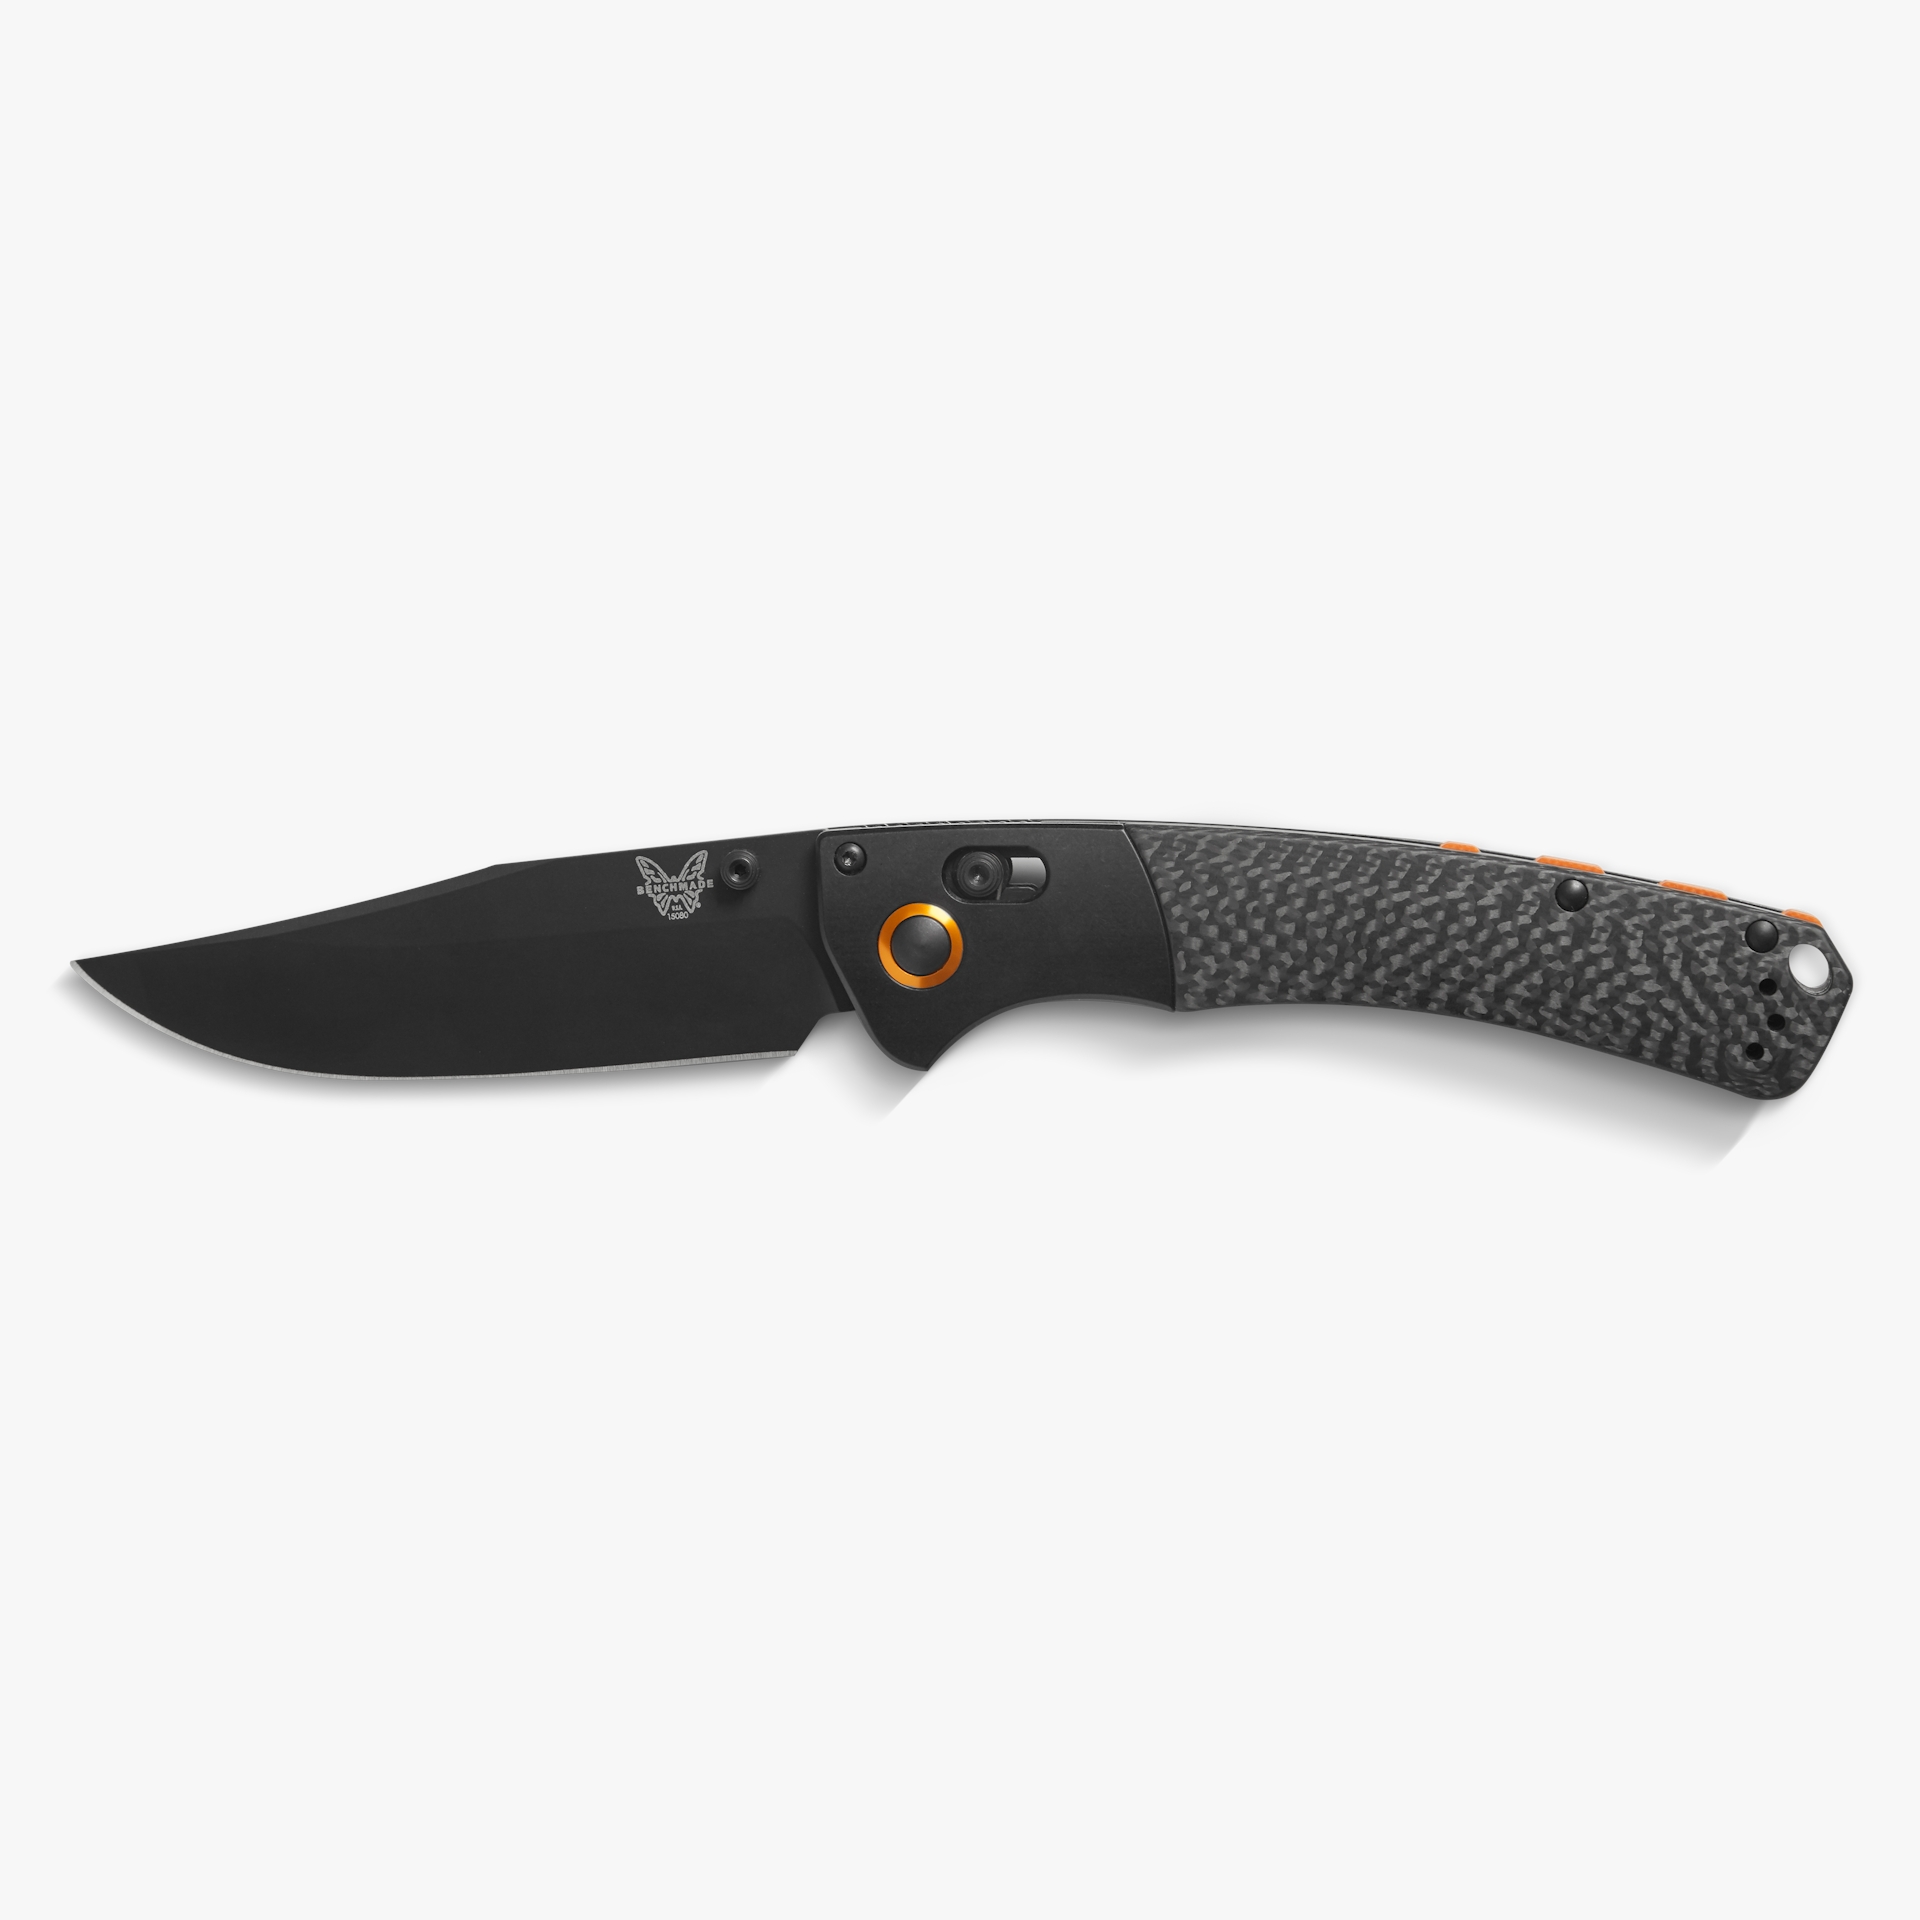 https://shinola-m2.imgix.net/images/Products/20242729-sdt-000011458/S0620242729_BenchmadeCarbonFiberHandle_CrookedRiver_PocketKnife_V1_MAIN_01.png?bg=f7f7f7&q=100&auto=format,compress